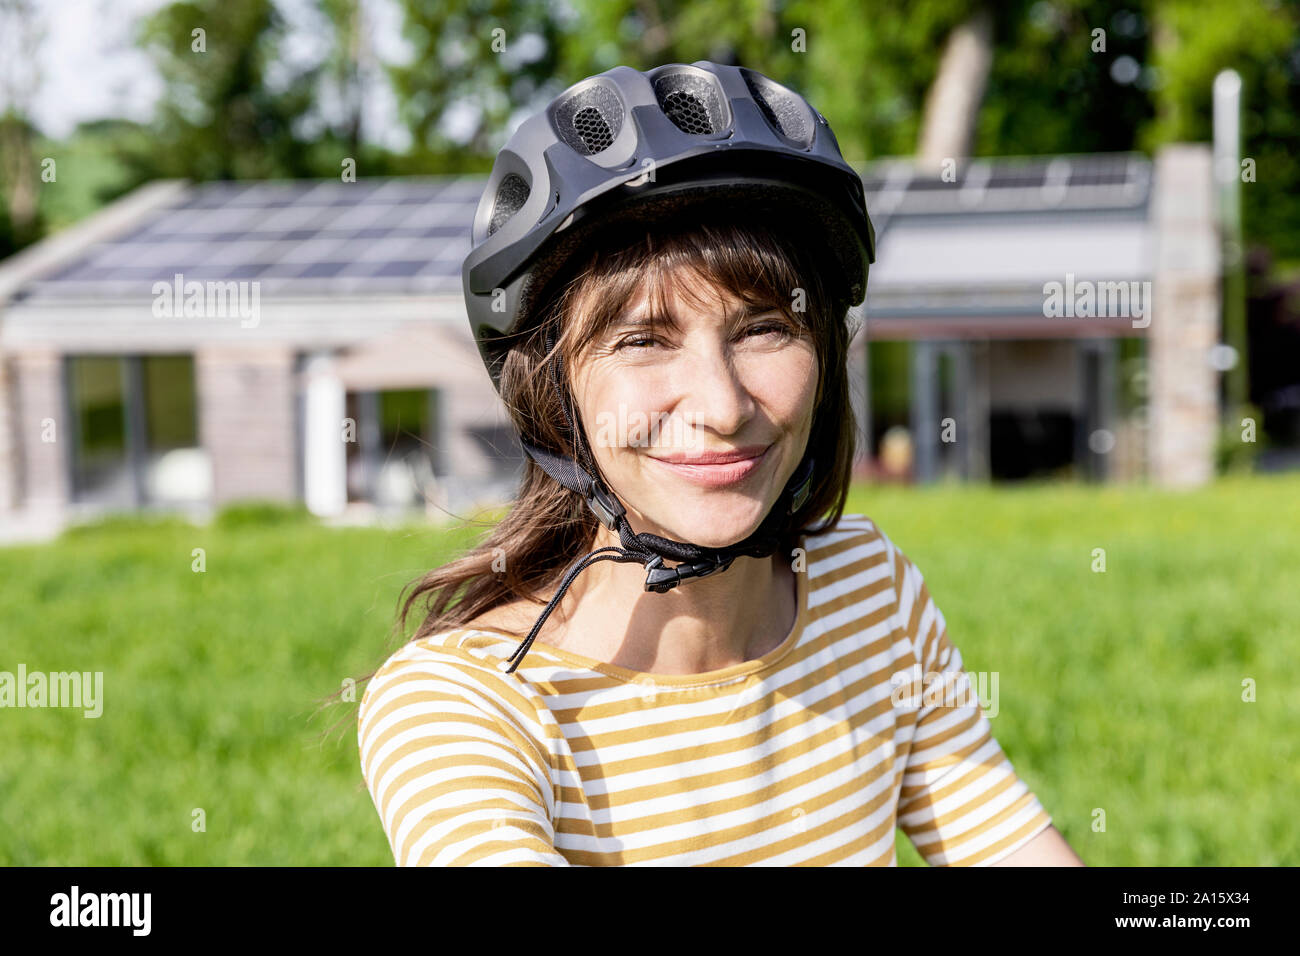 Portrait of smiling woman with bicycle helmet on a meadow in front of a house Stock Photo